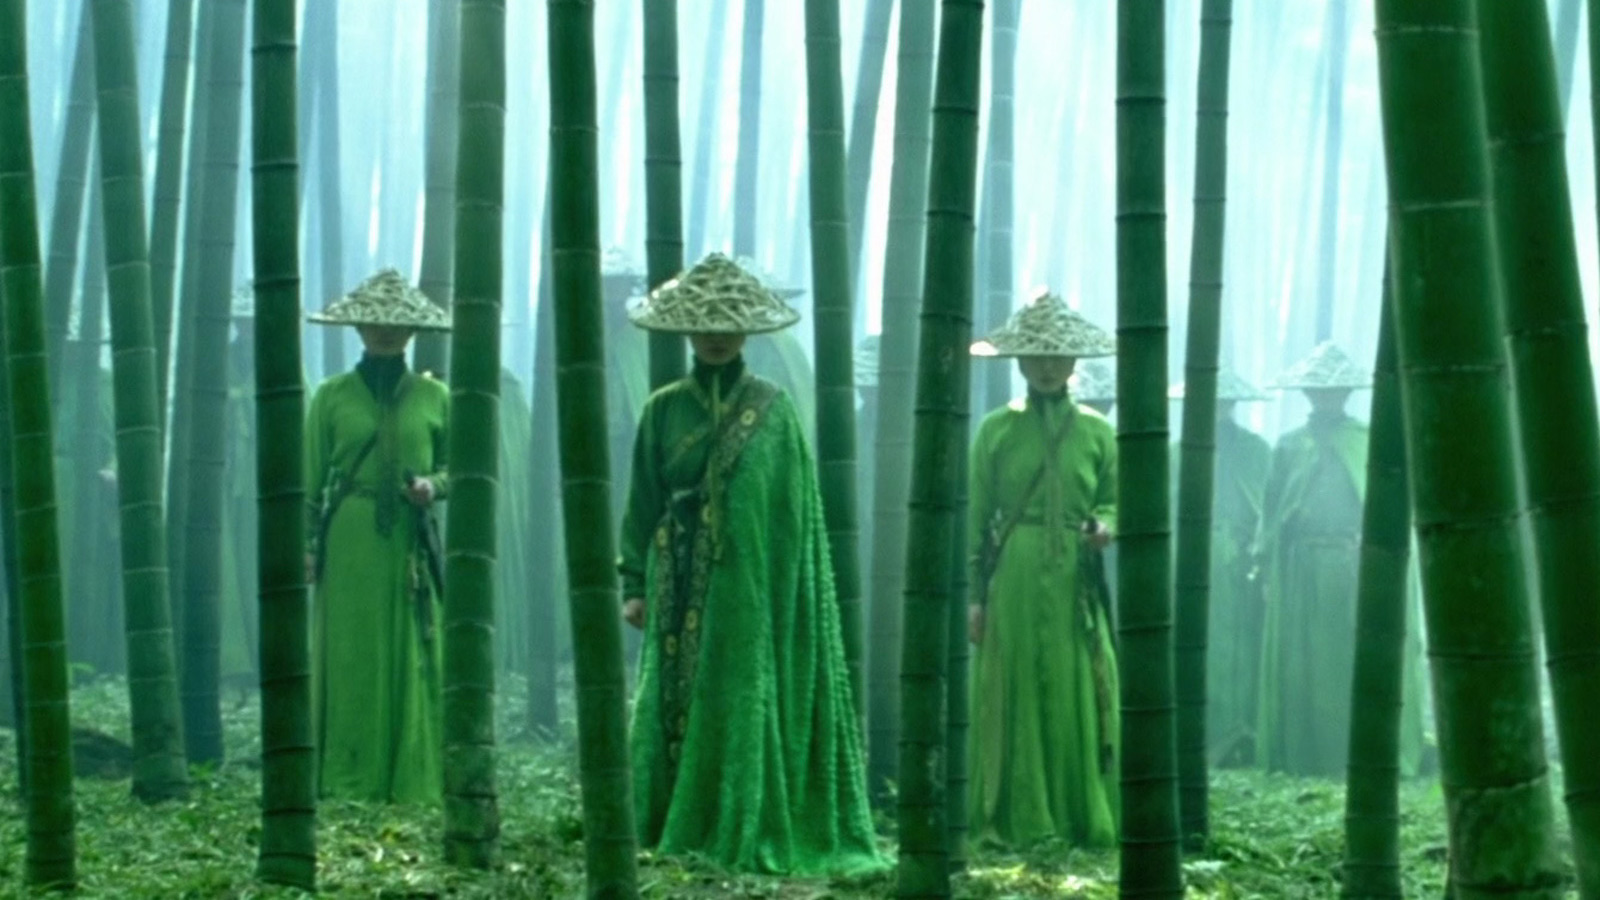 A line of emerald green-dressed assassins, their faces hidden under hats, stands in a bamboo forest facing the camera